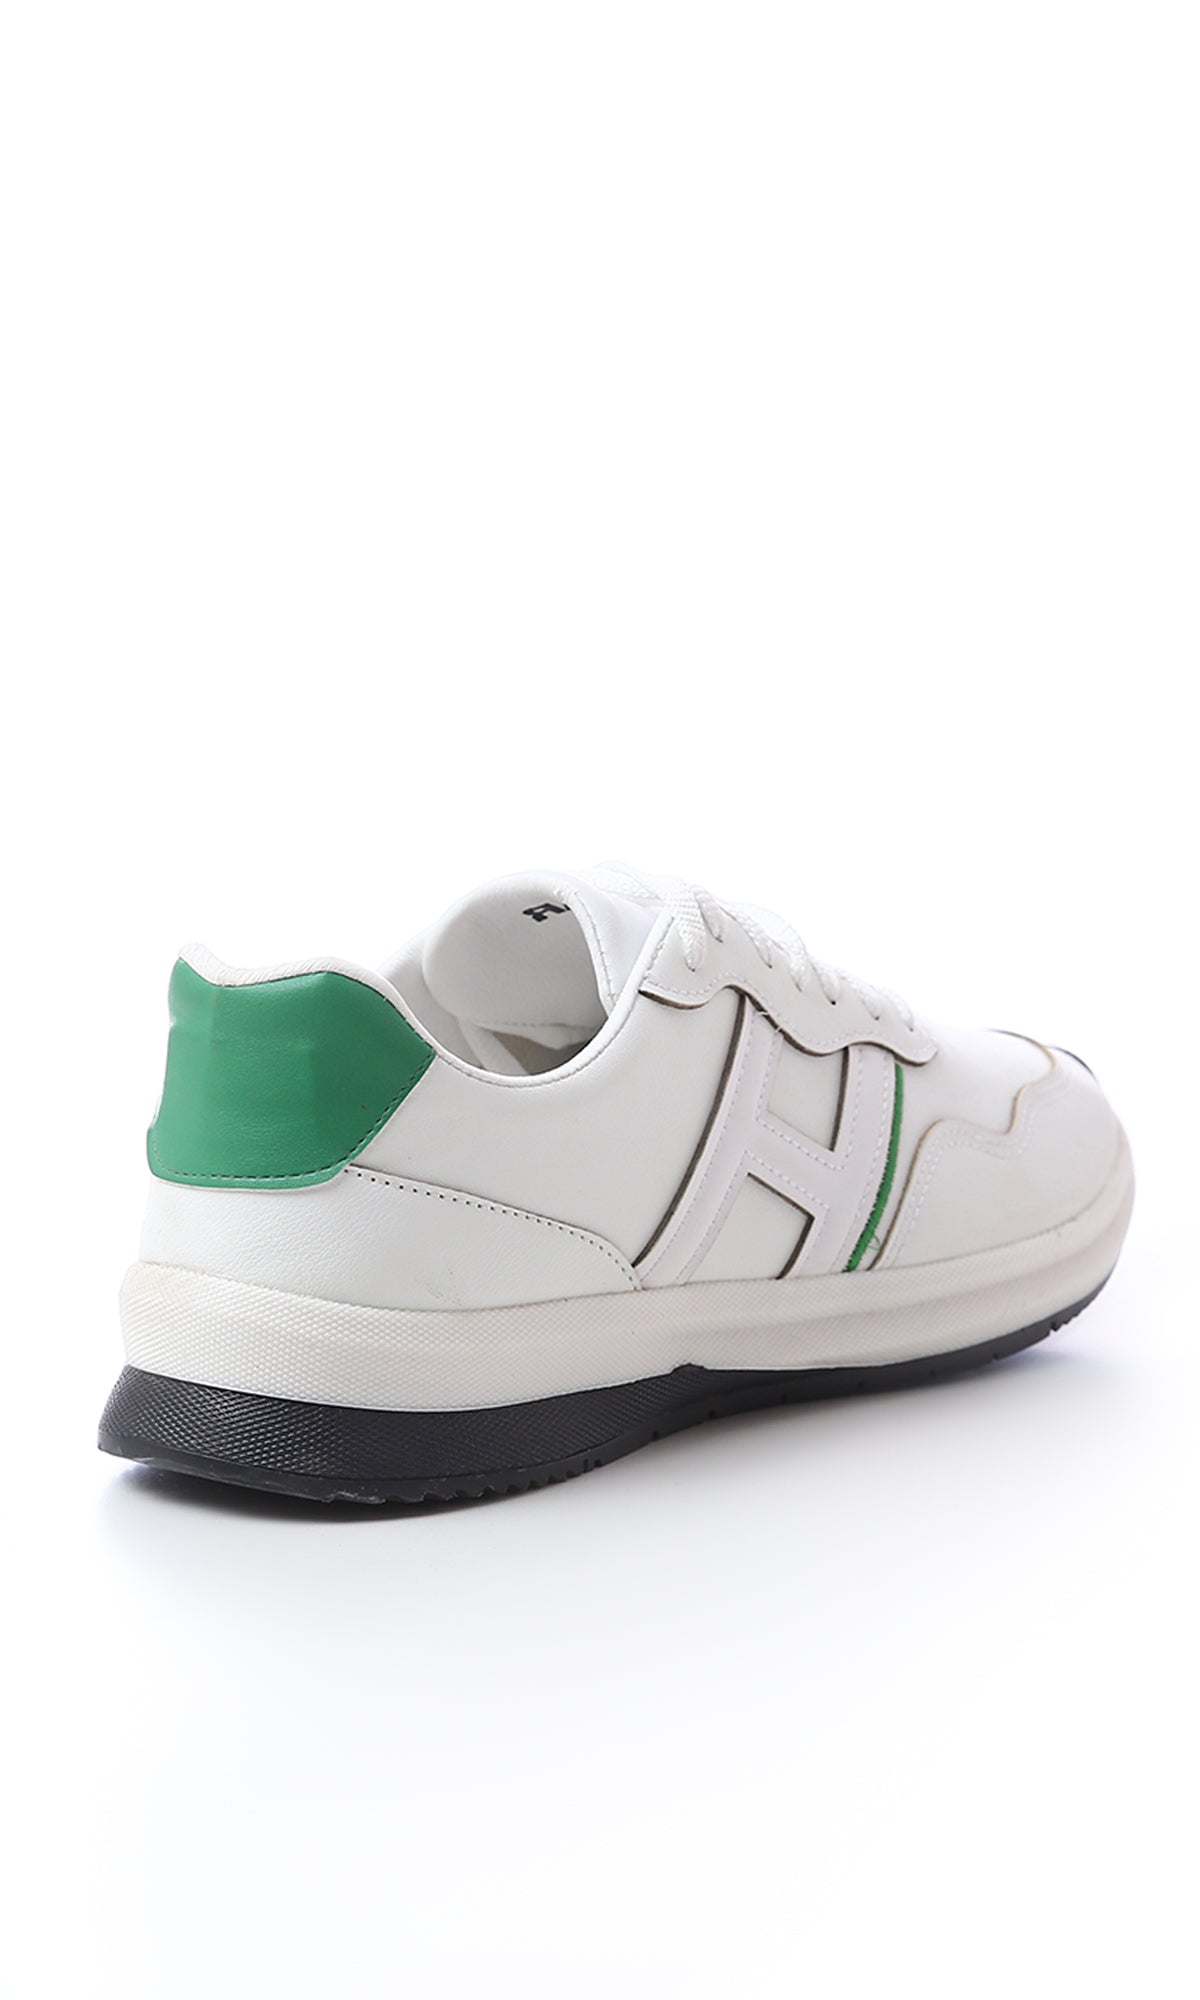 O175292 White Textured Leather Lace Up Casual Shoes